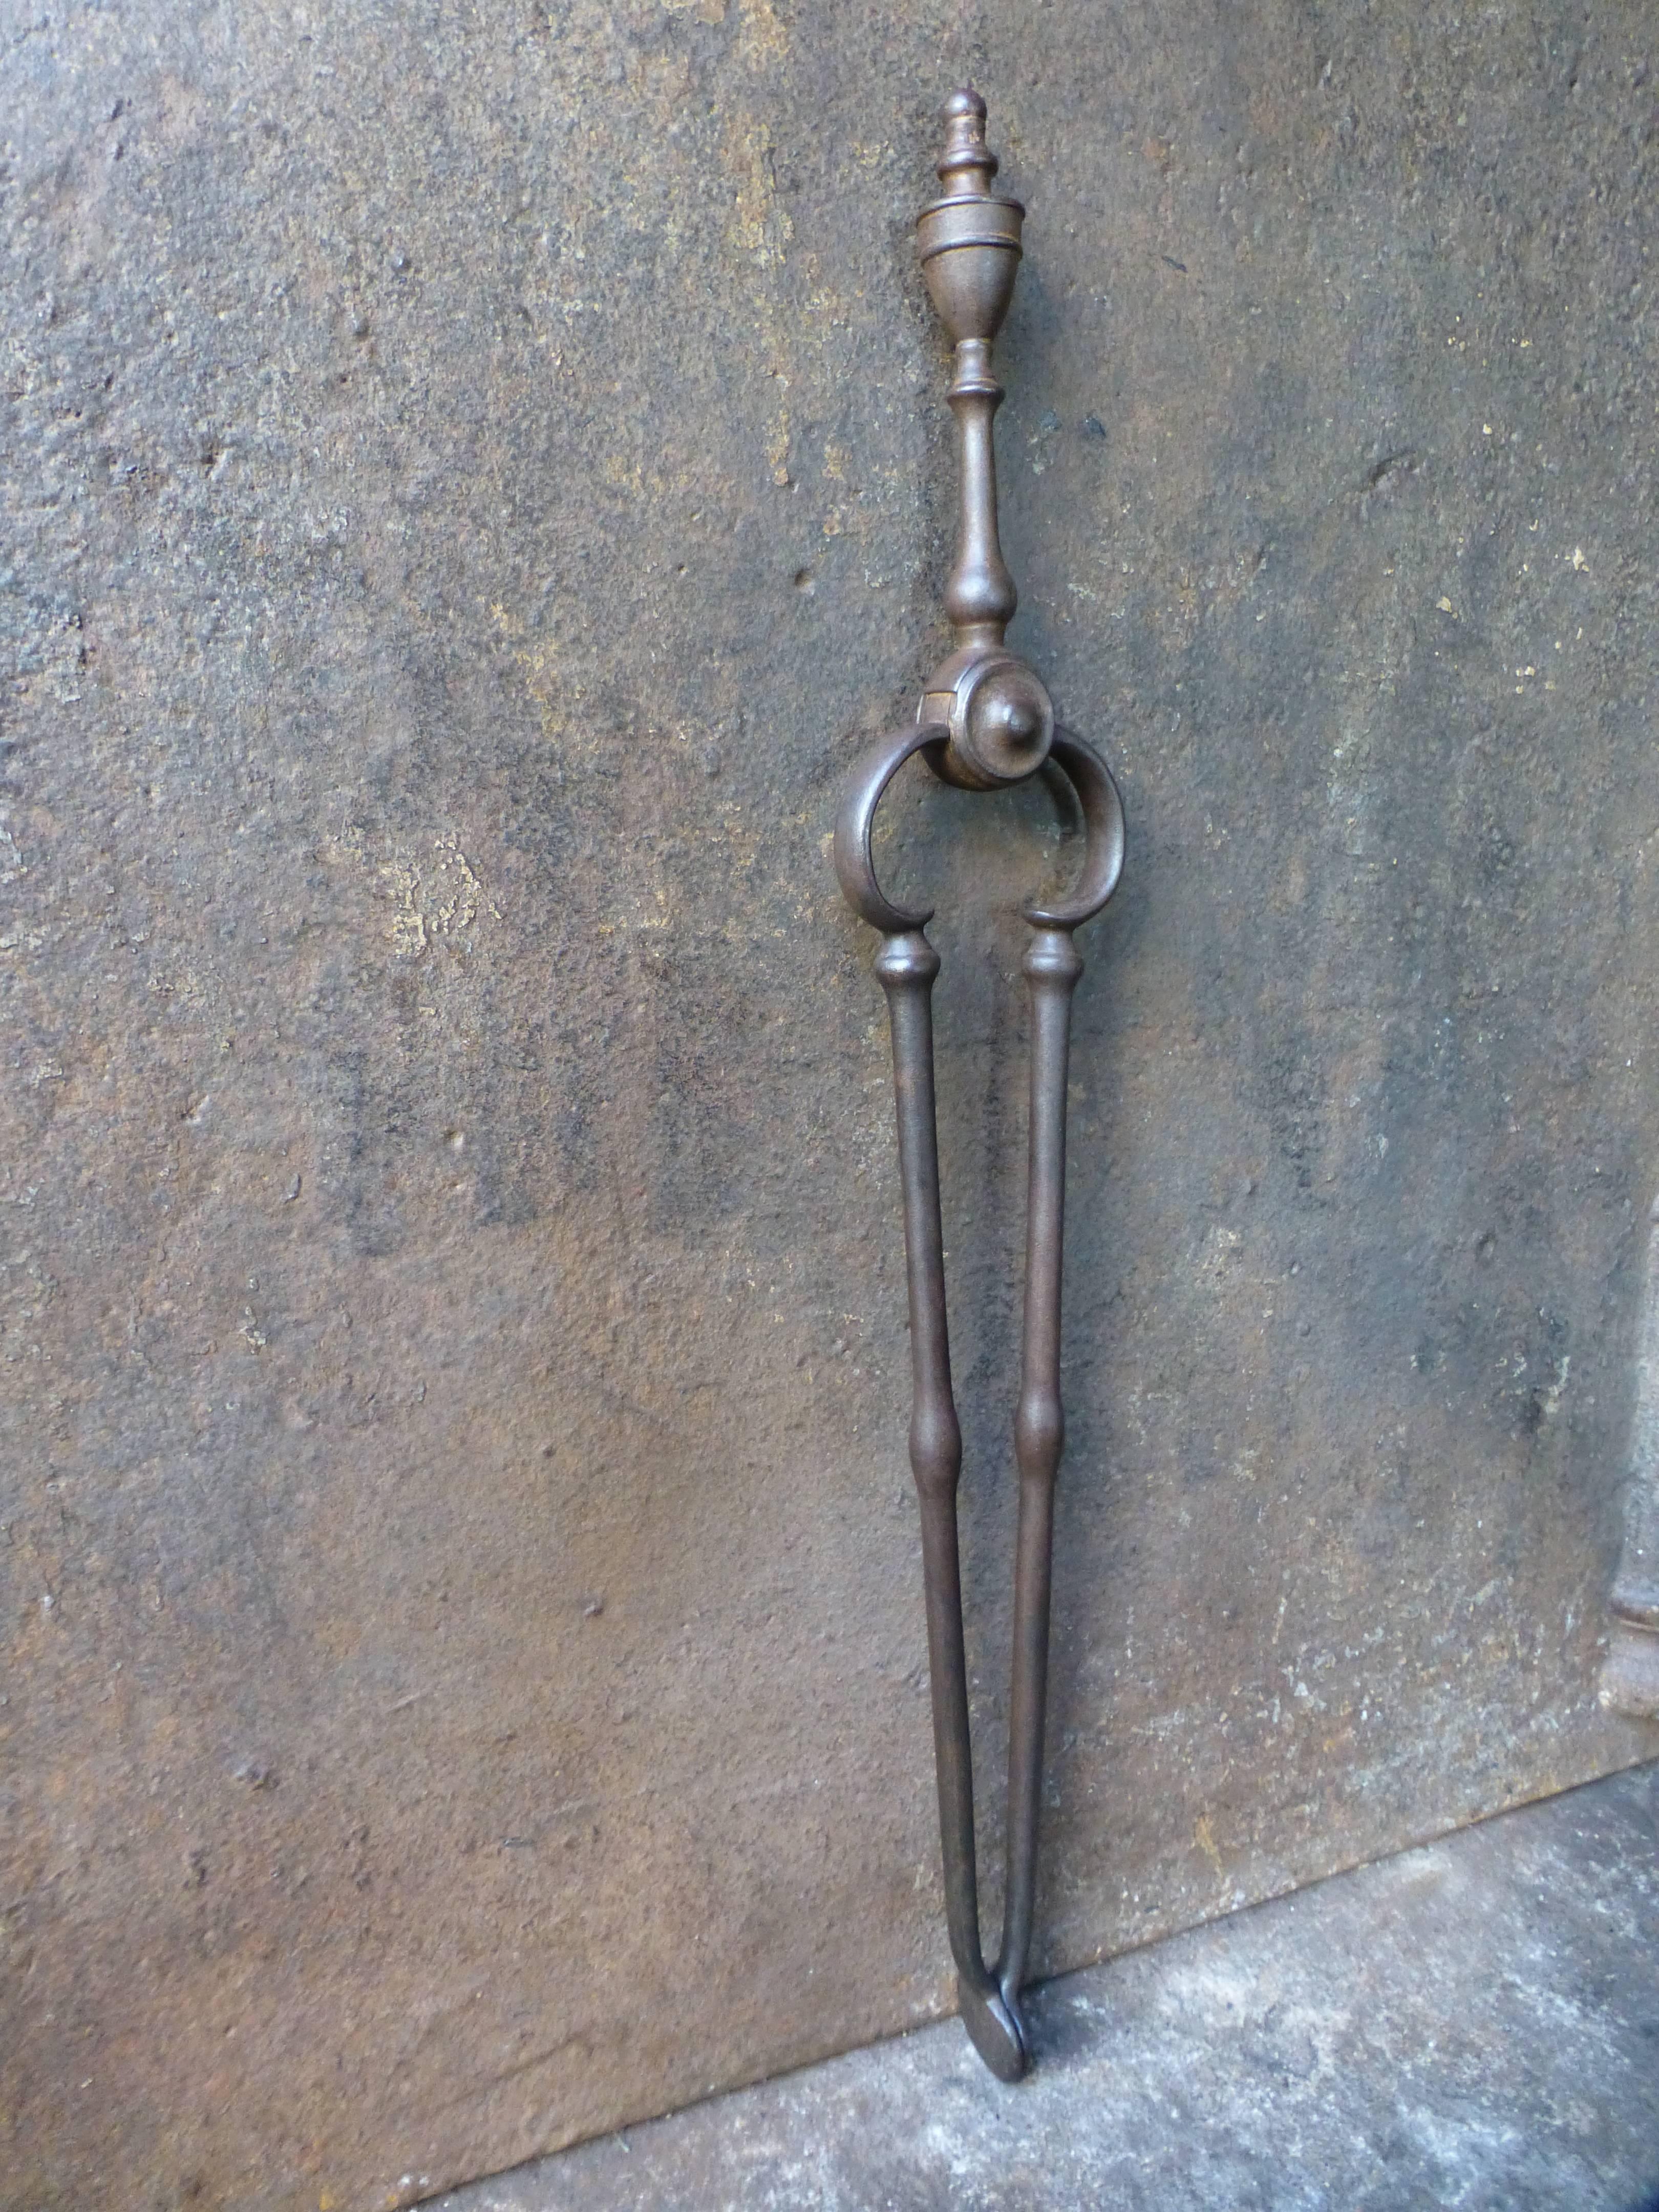 19th century English fireplace tongs made of wrought iron.